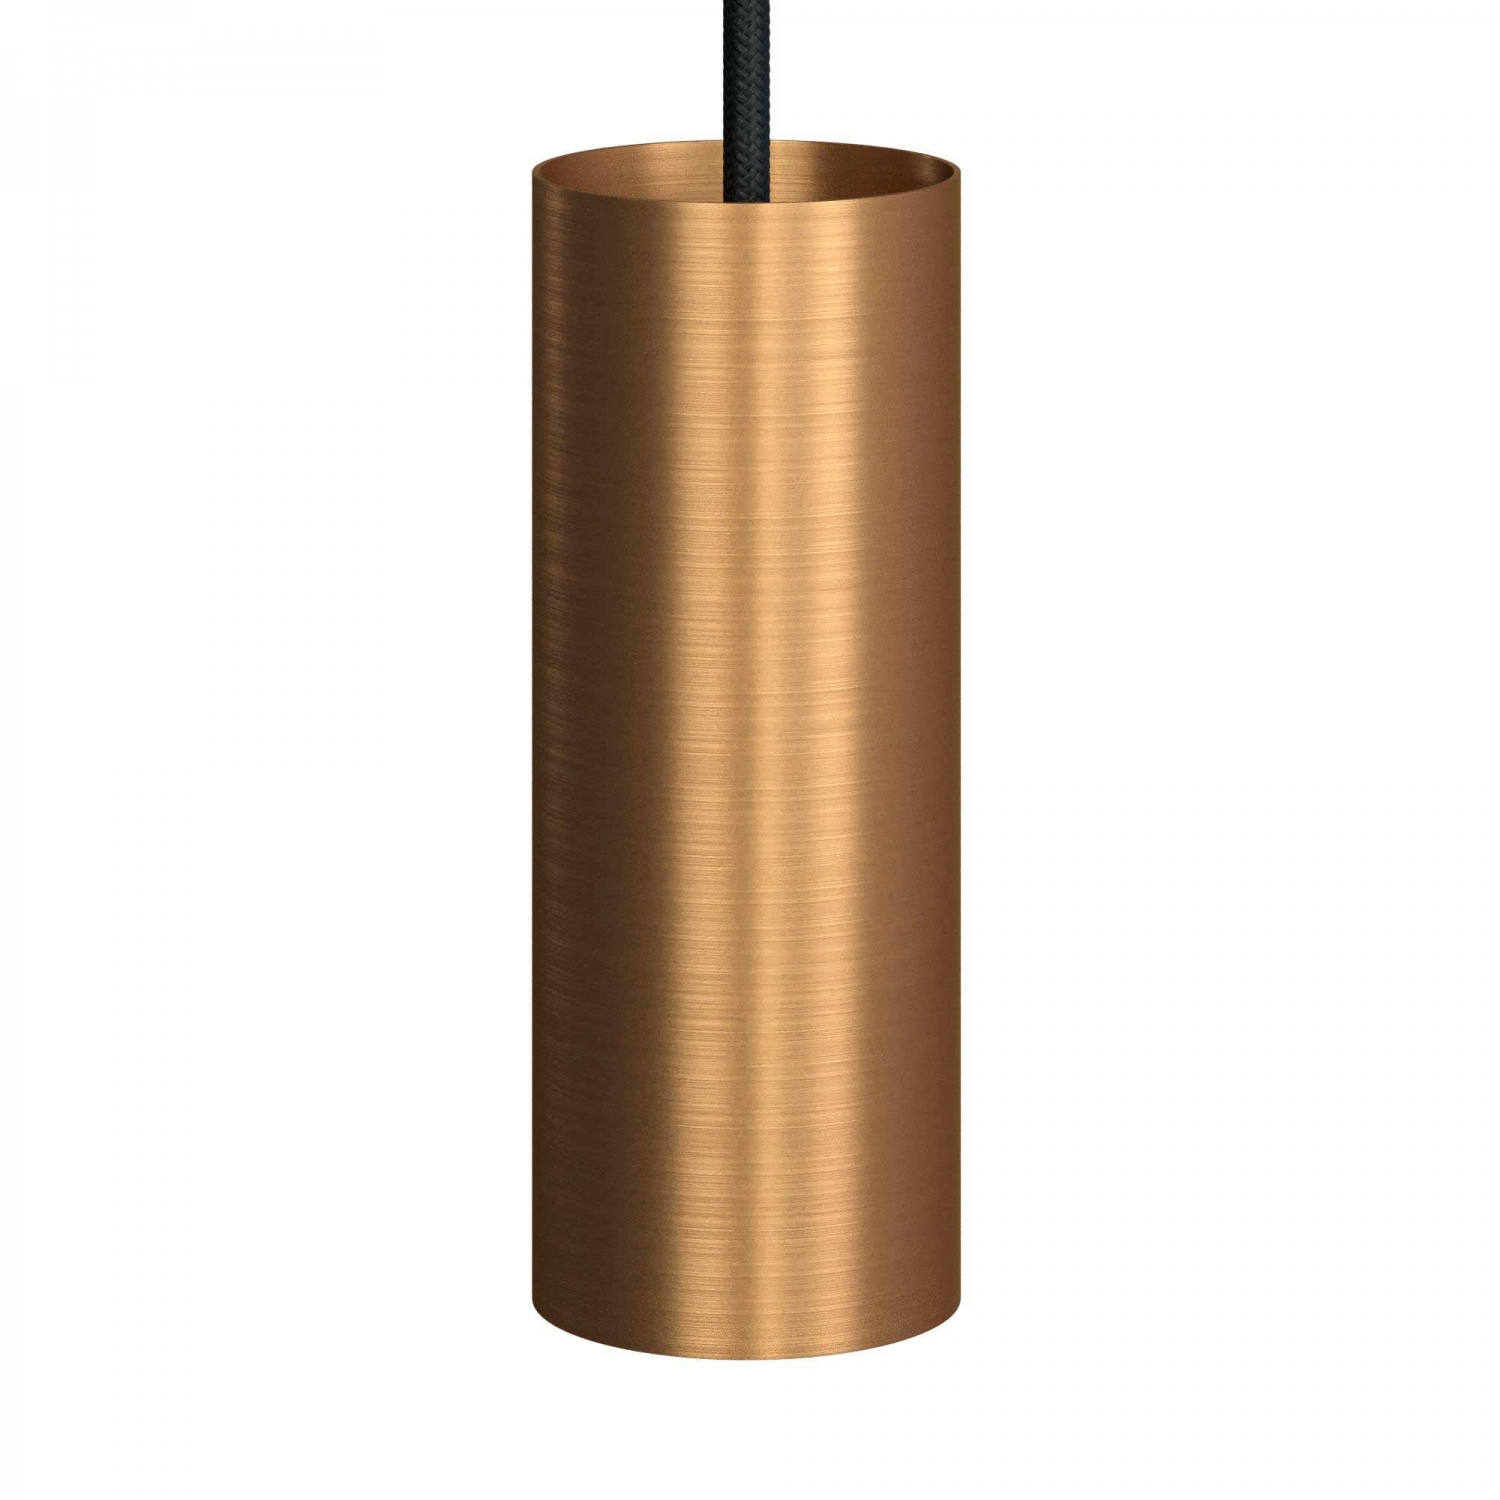 Pendant lamp with textile cable, Tub-E12 lampshade and metal details